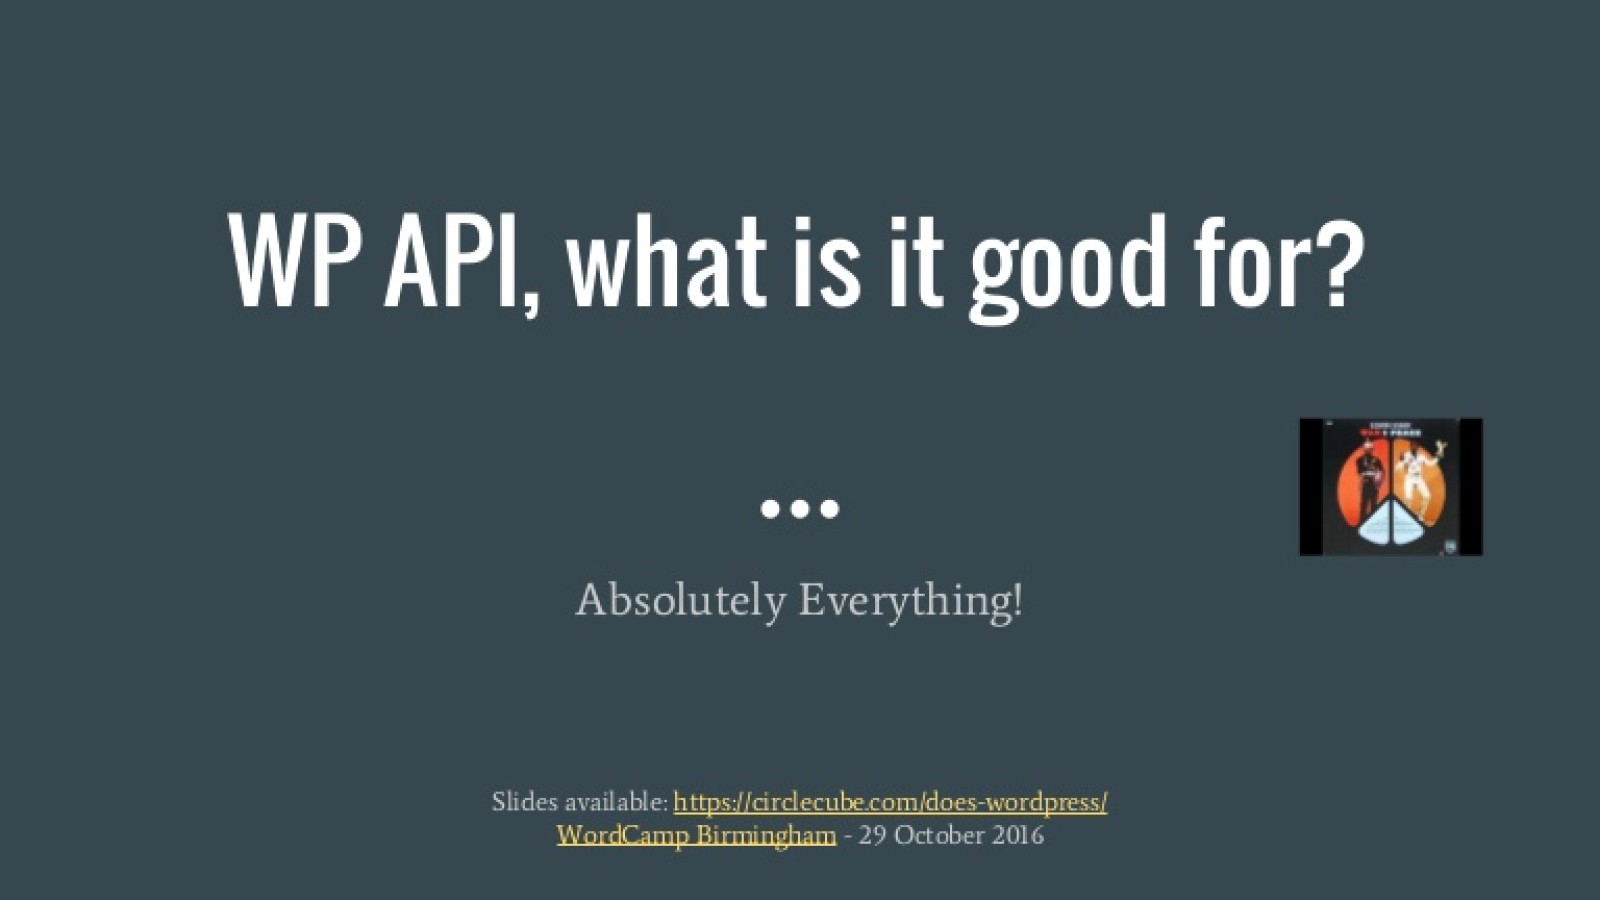 WP API, What is it Good For? Absolutely Everything!